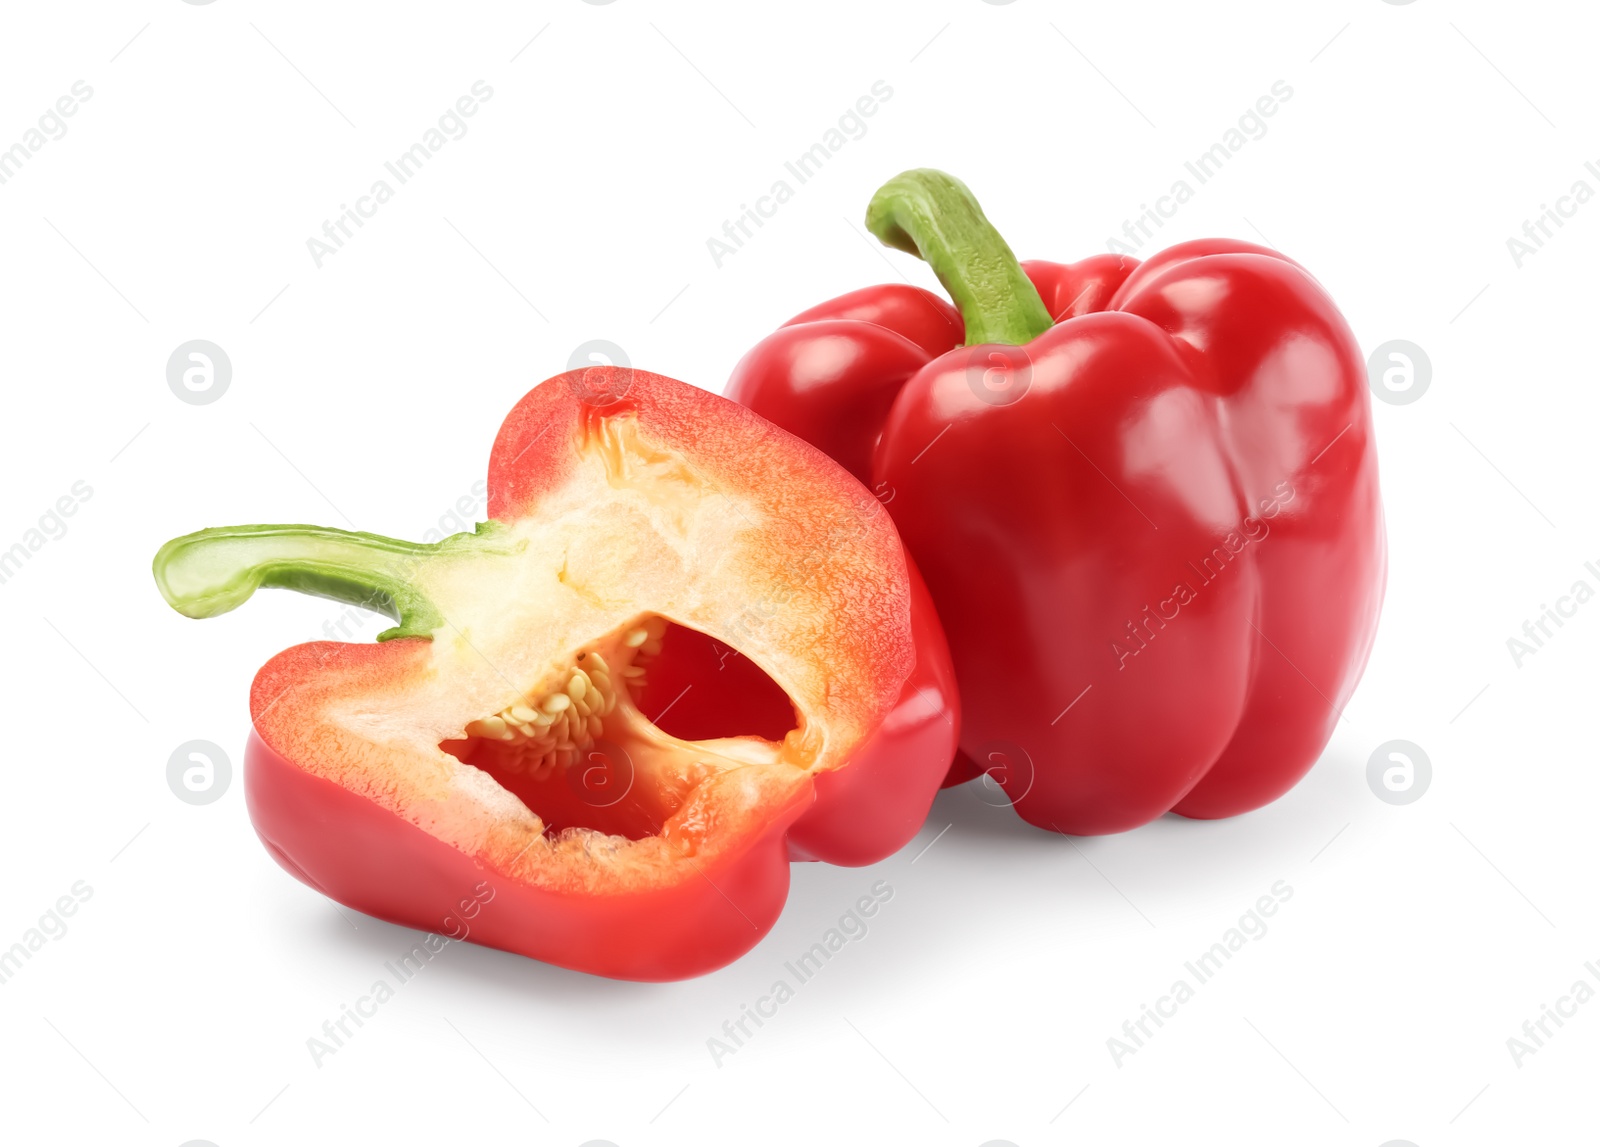 Photo of Whole and cut red bell peppers on white background